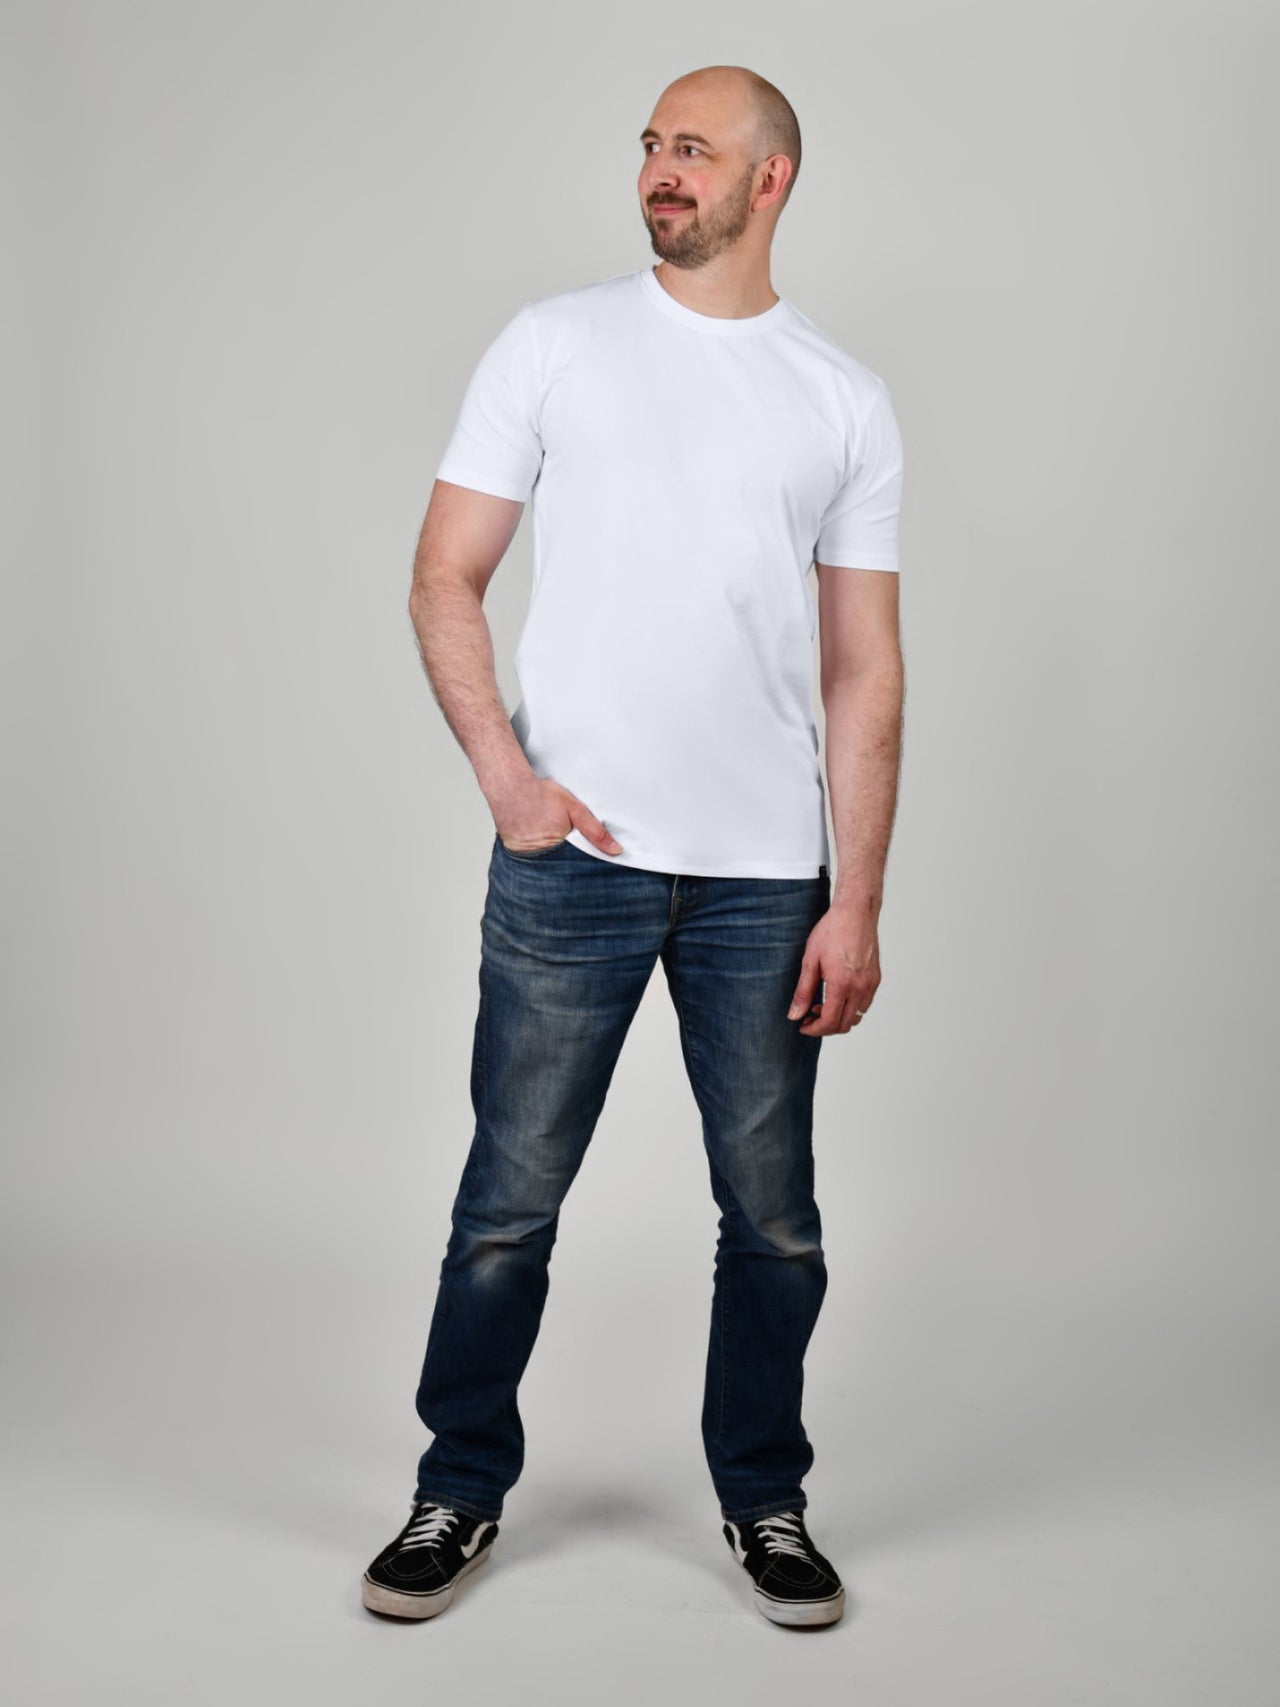 A head to toe shot of a tall and slim guy, hand in pocket, in the studio wearing a white XL tall slim t-shirt.